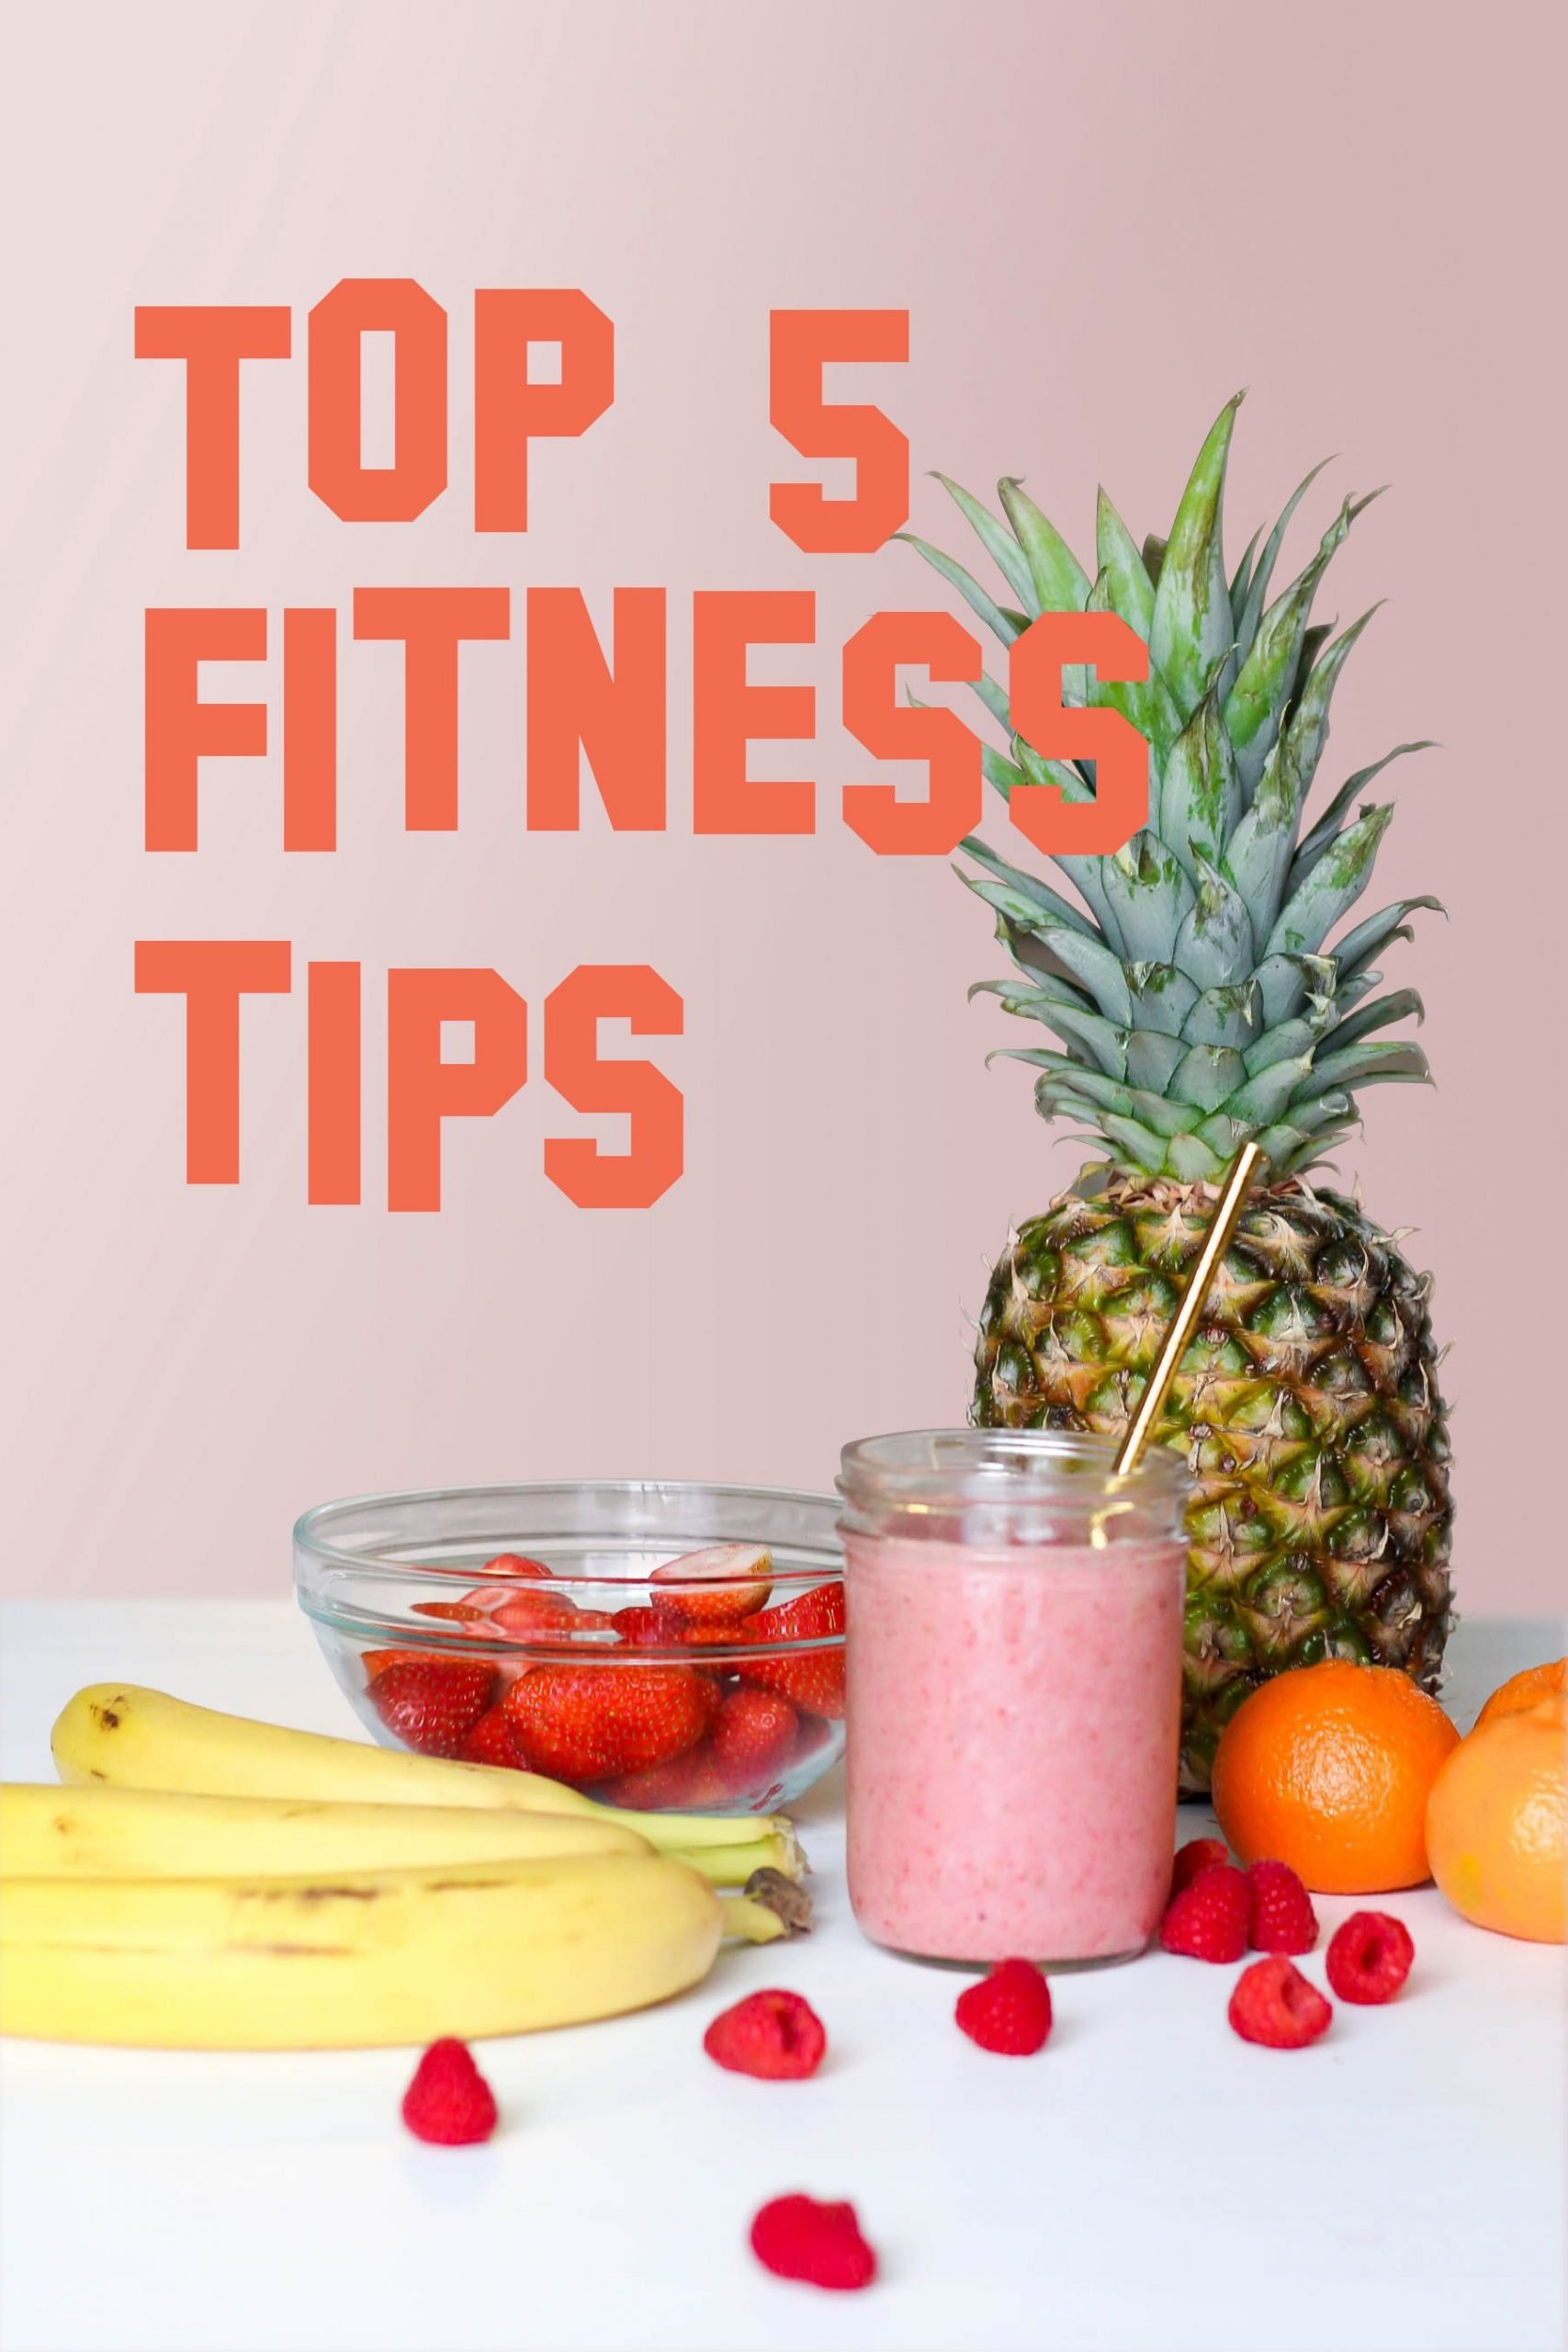 Top 5 fitness tips (With images)